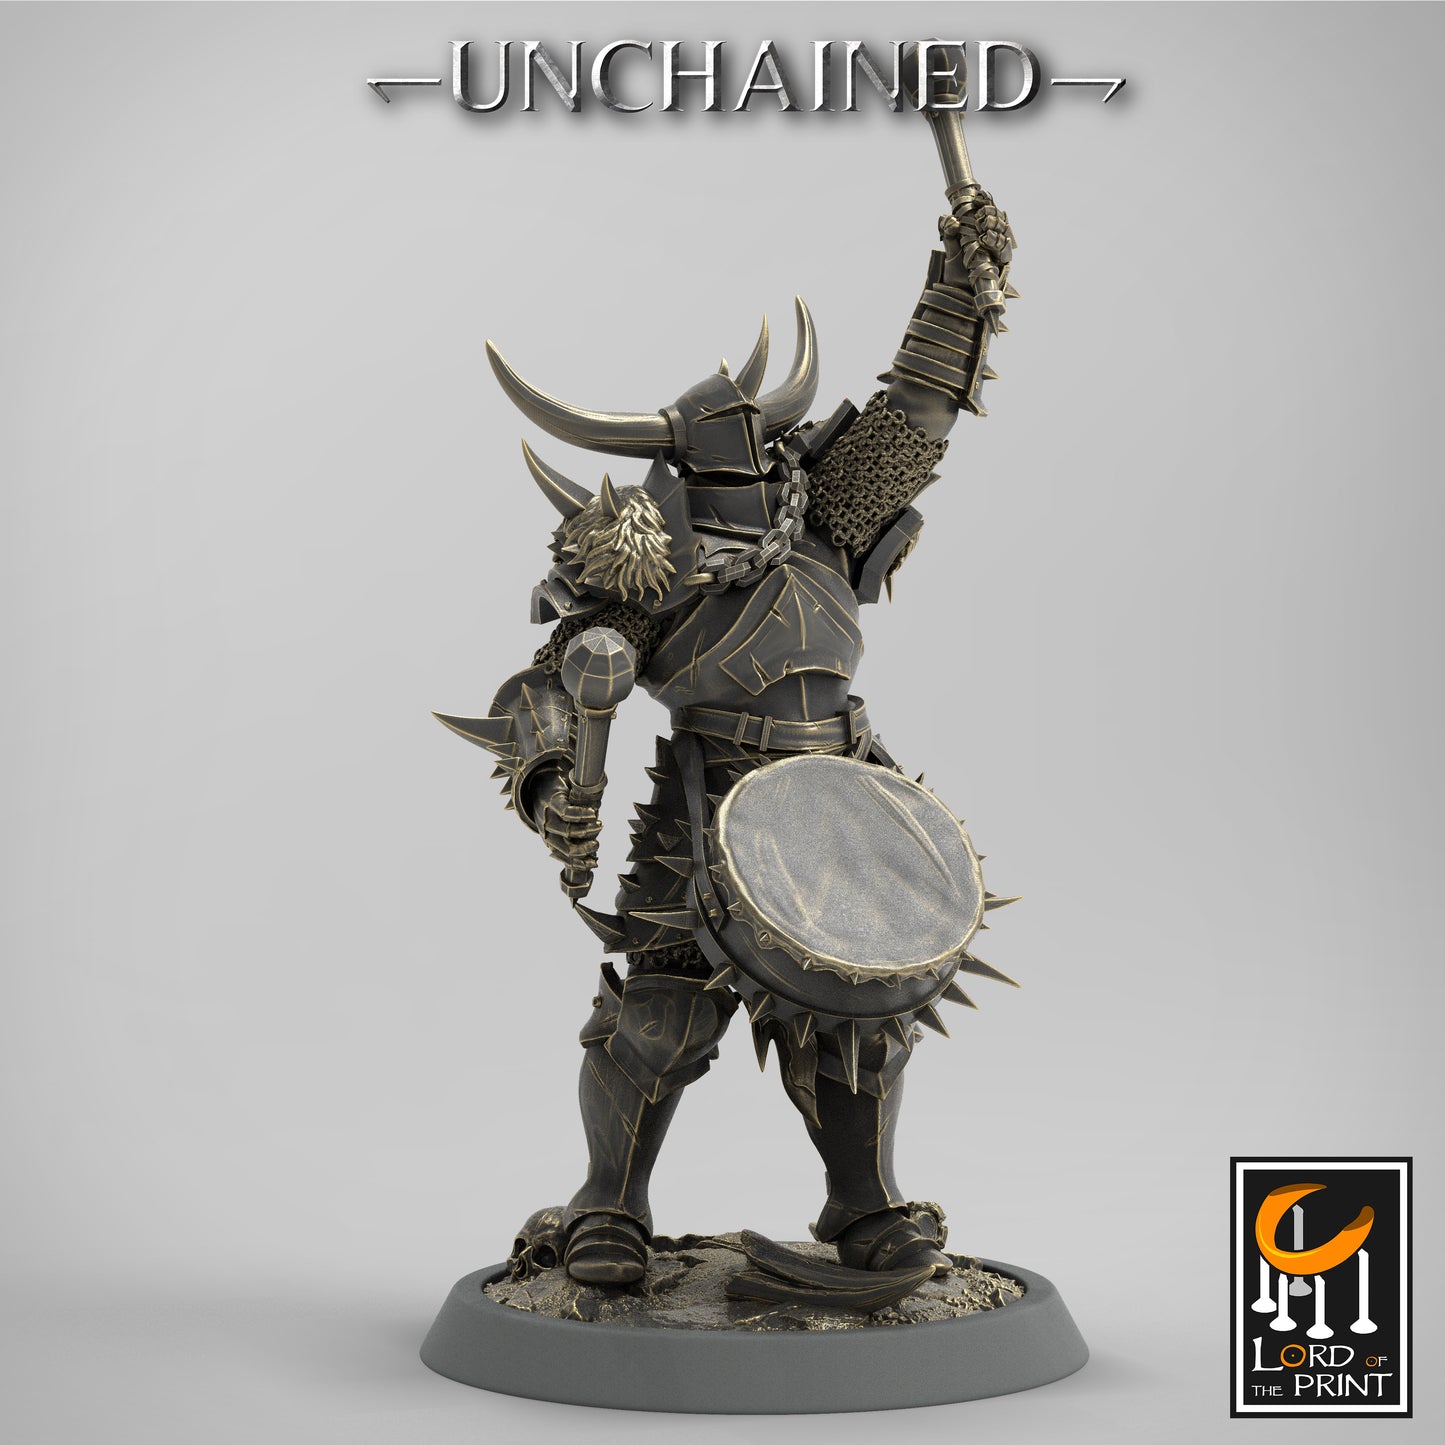 Light Soldiers - Drummer - UNCHAINED ARMY